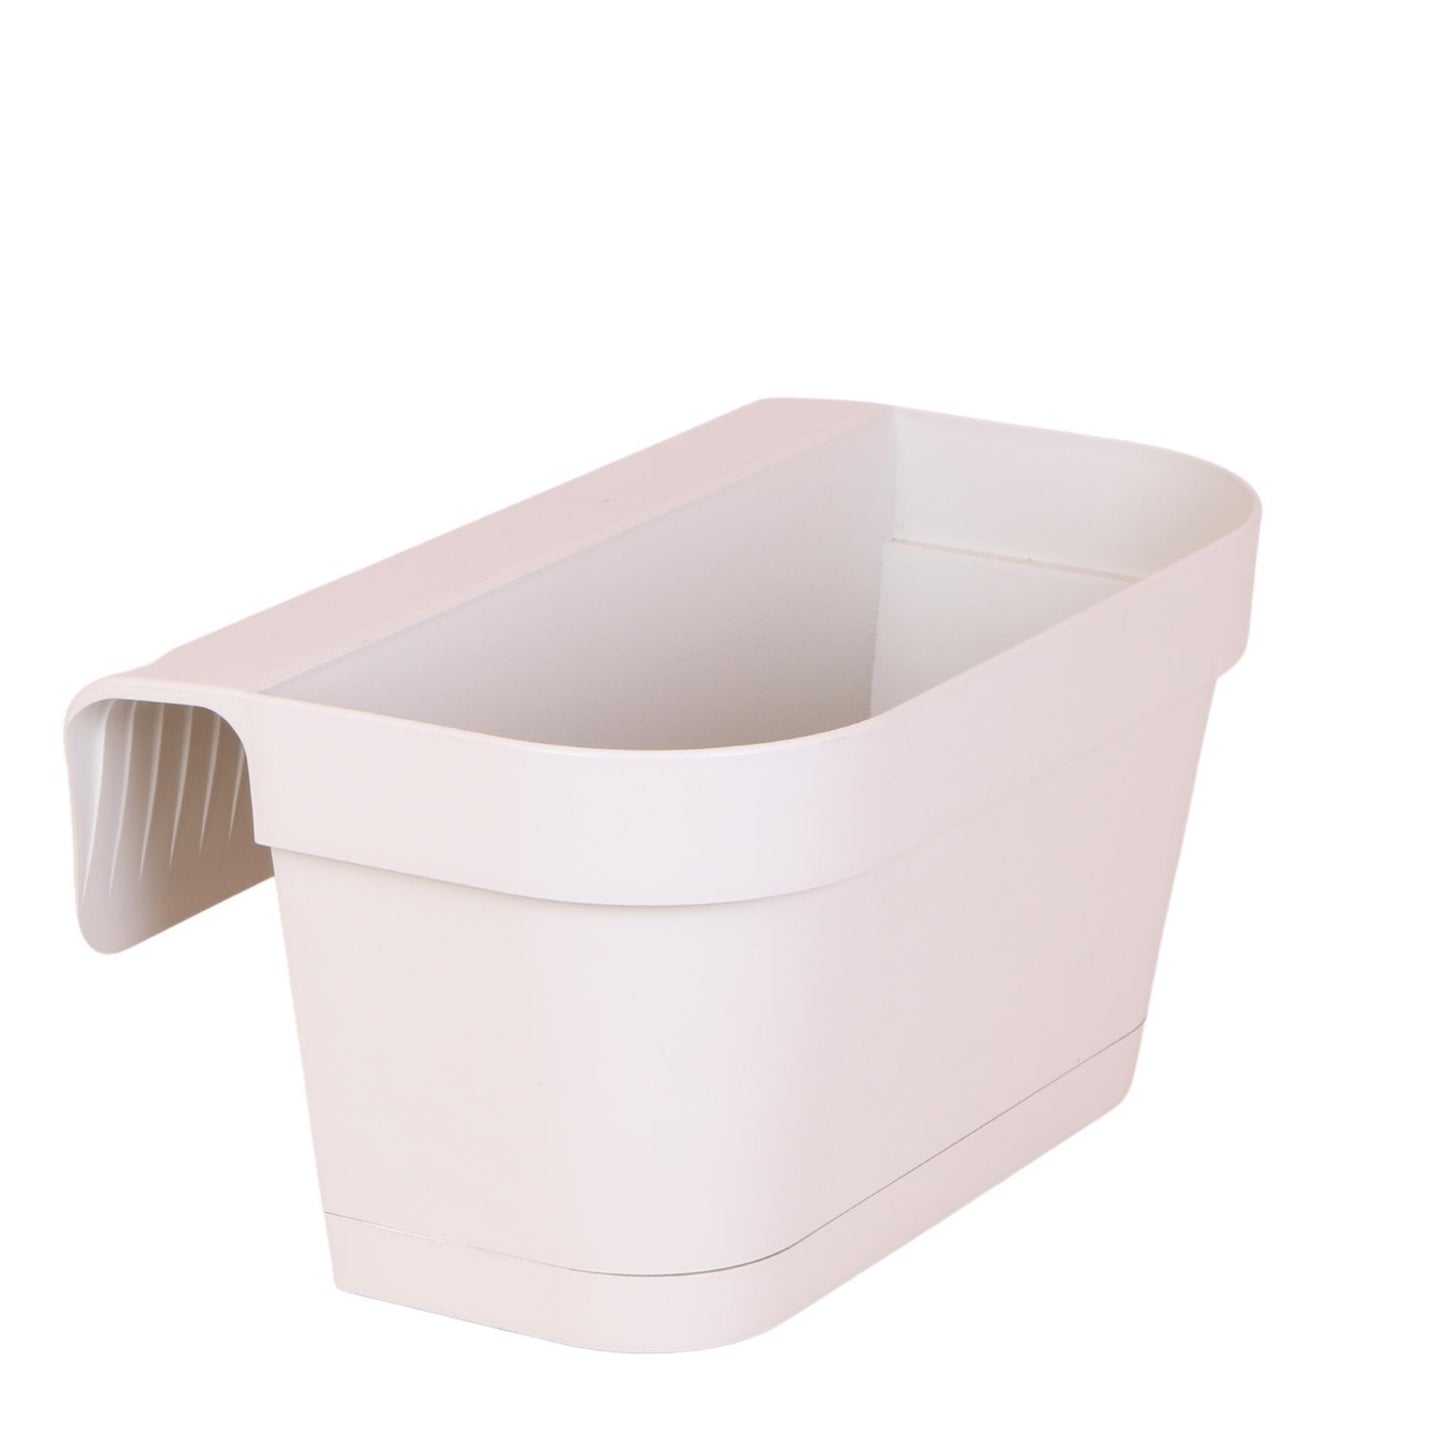 Hummingbird Home | White plastic balcony planter with hanging system - 36 cm wide